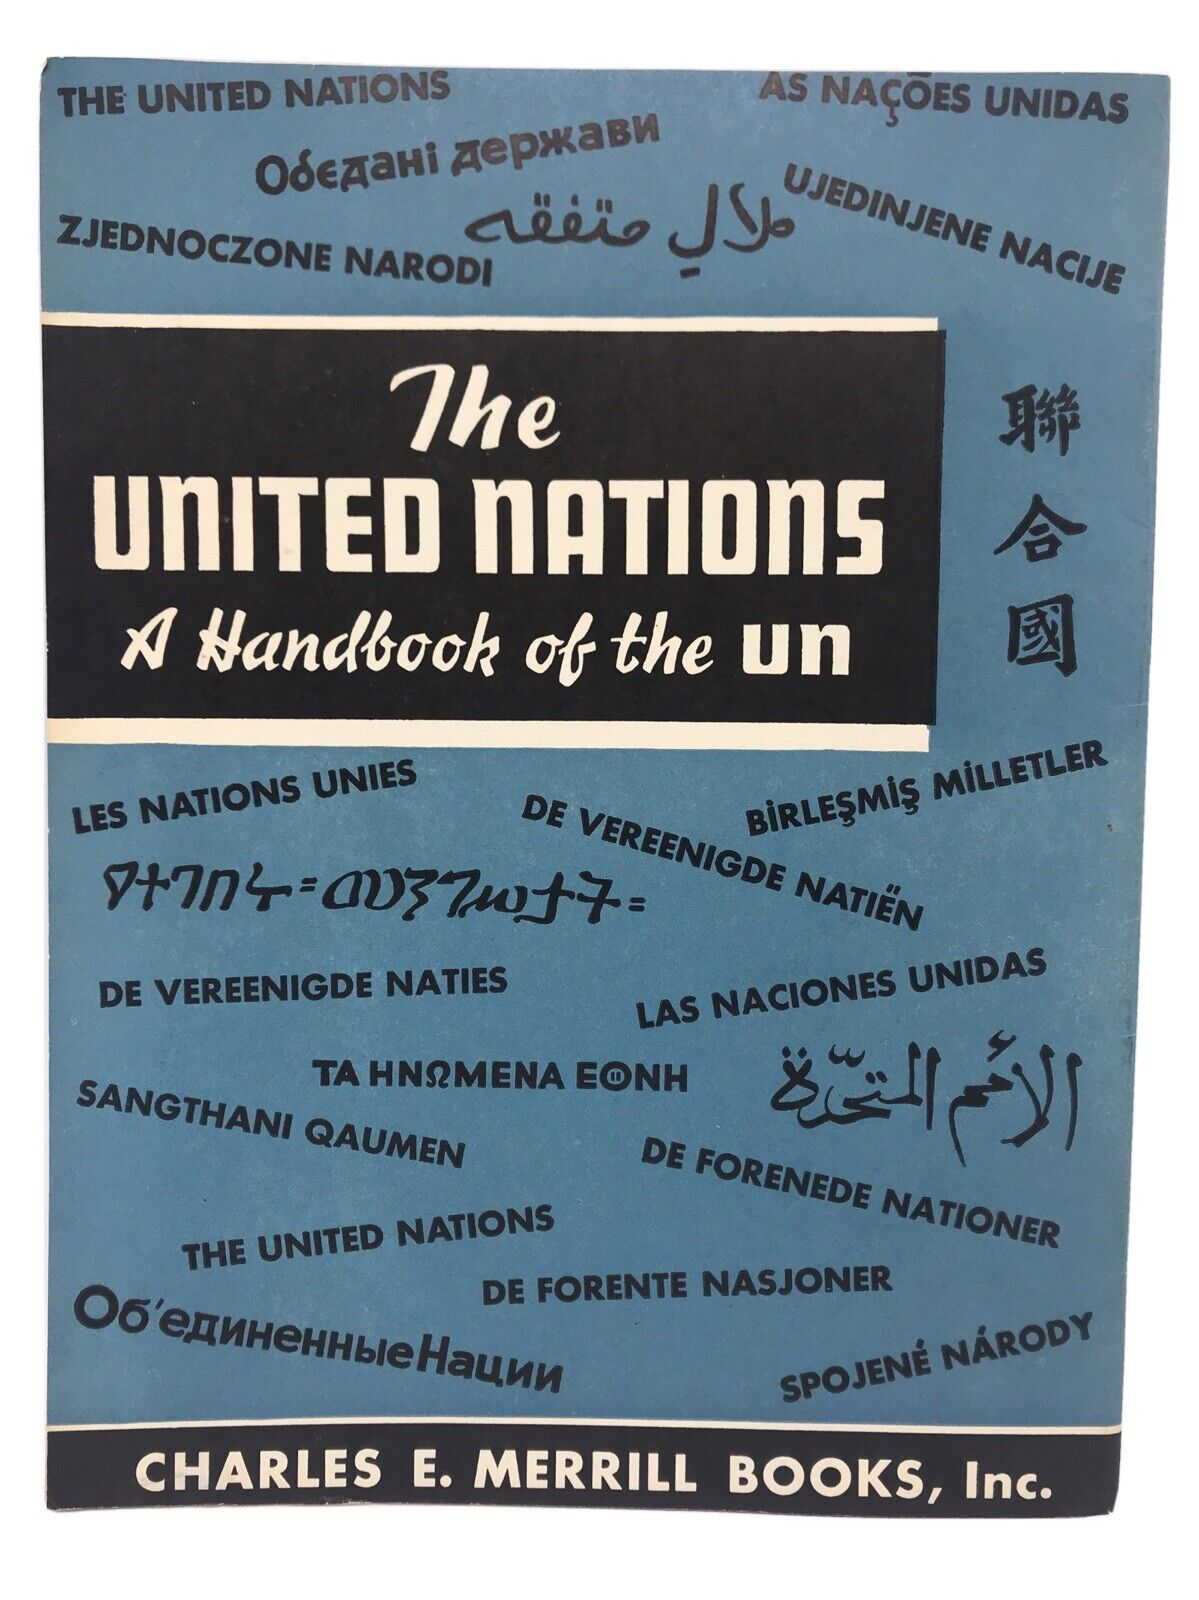 1958 The United Nations a Handbook of the UN - Charles E. Merrill Books 